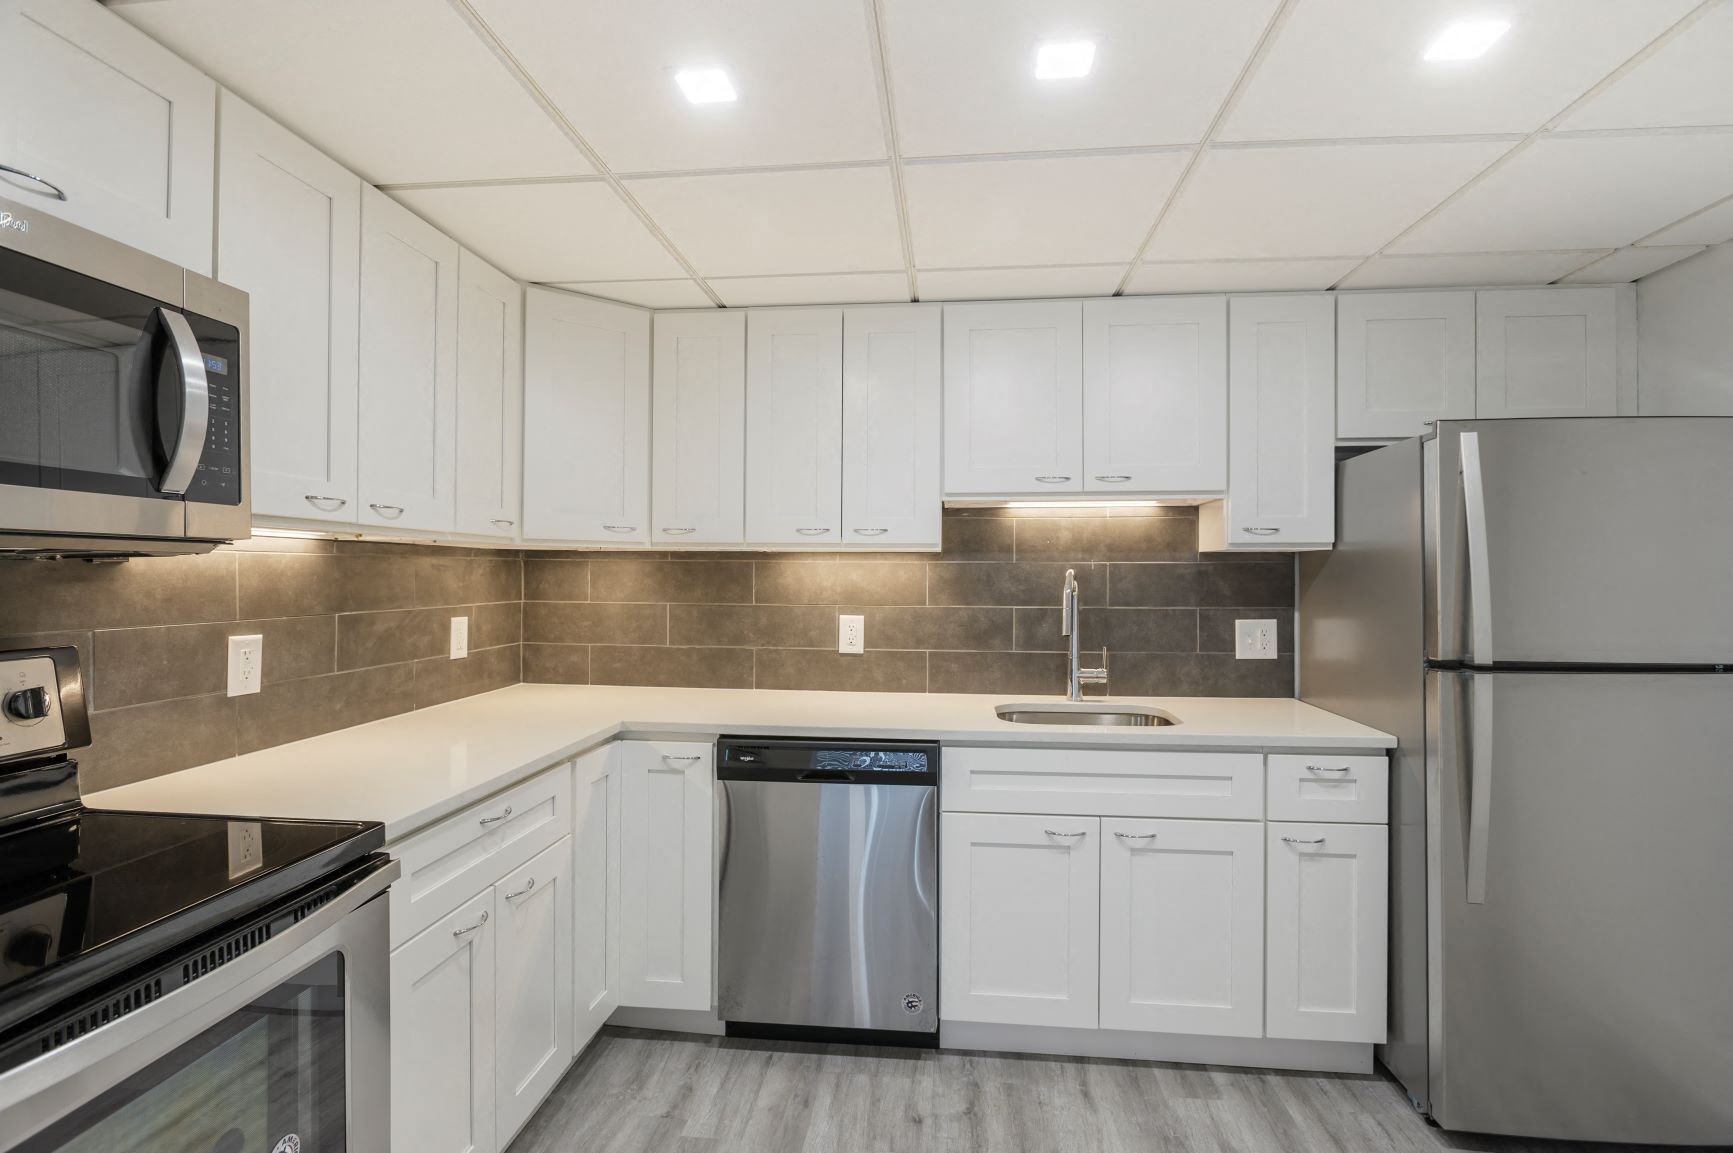 Renovated kitchen with stainless steel appliances